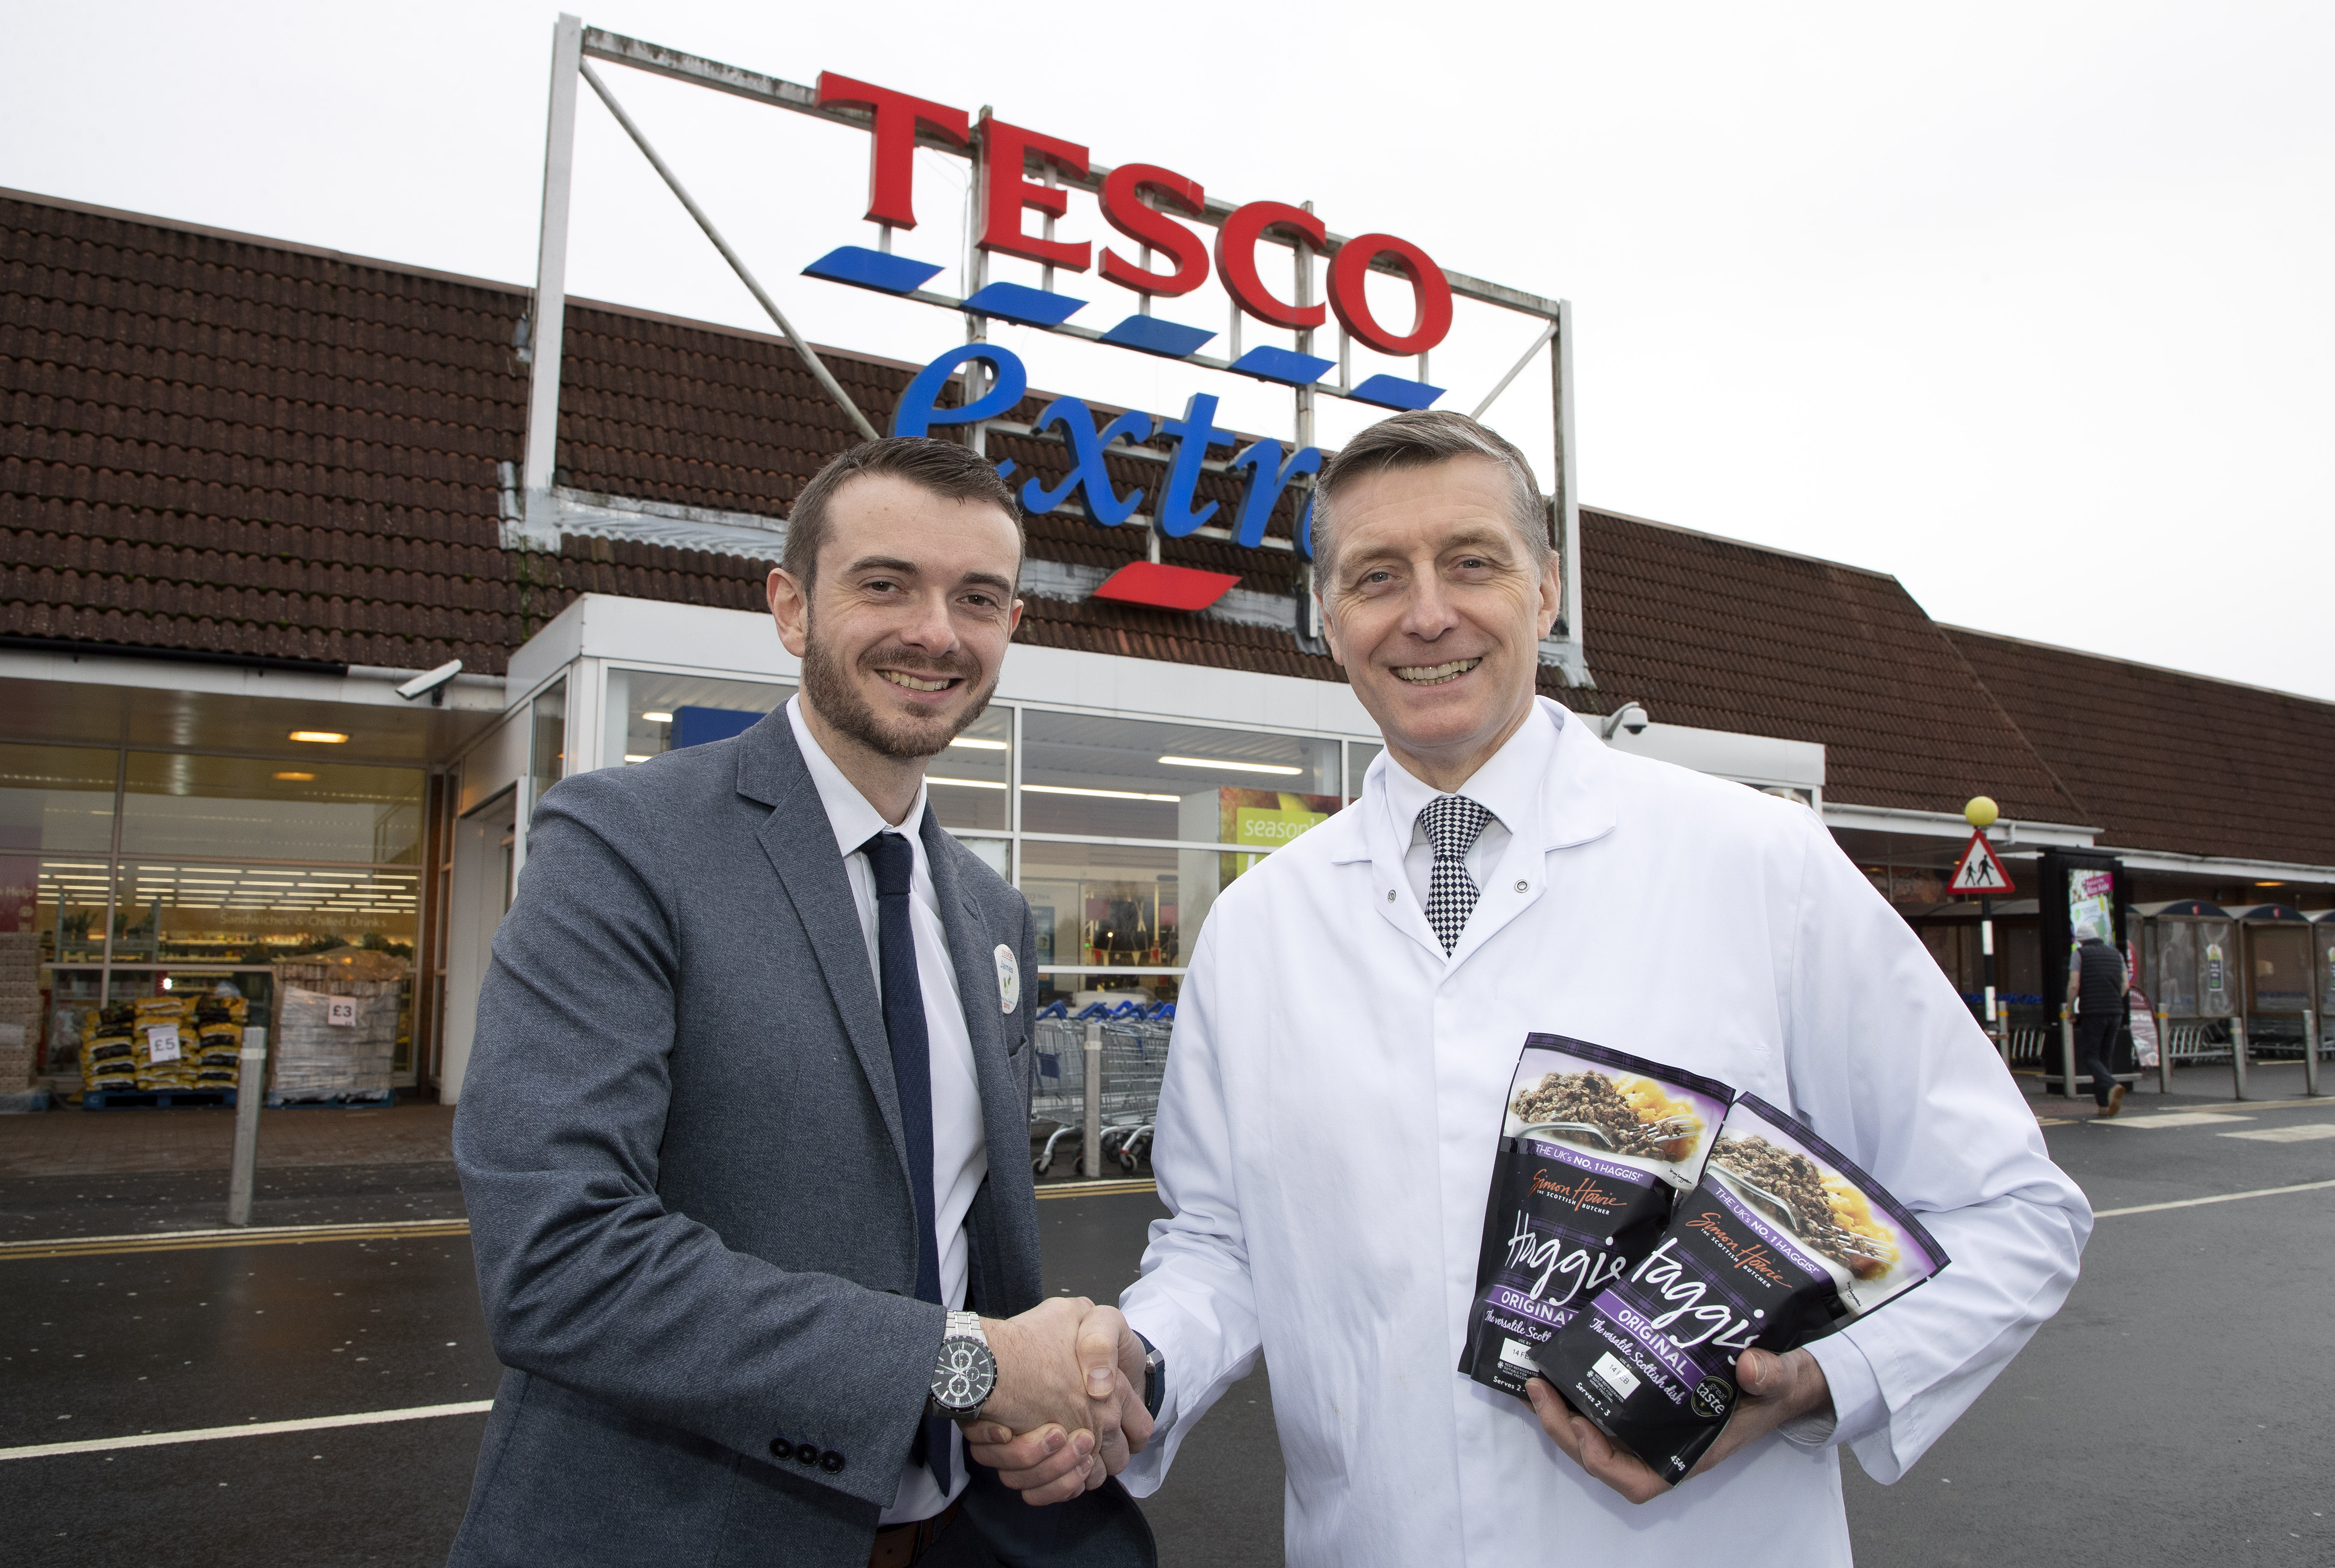 Simon Howie pictured with his haggis at the Tesco store on Crieff Road in Perth alongside buying manager James Lamont
for further info please contact Holly Kidd at Big Partnership on 0131 557 5252 or holly.kidd@bigpartnership.co.uk
Picture by Graeme Hart.
Copyright Perthshire Picture Agency
Tel: 01738 623350  Mobile: 07990 594431